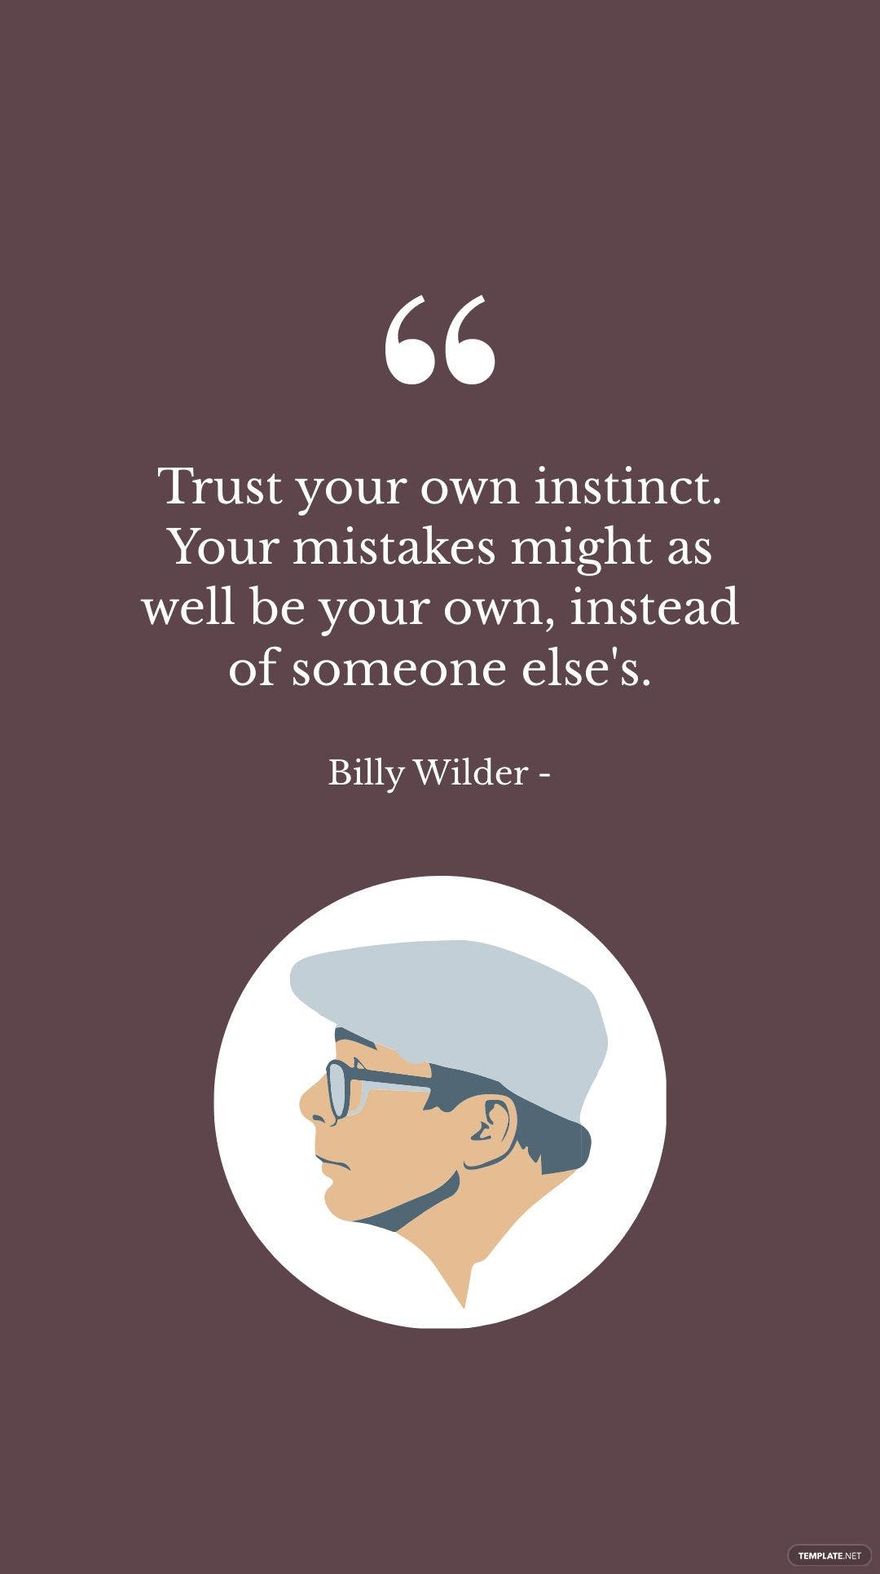 Billy Wilder - Trust your own instinct. Your mistakes might as well be your own, instead of someone else's.